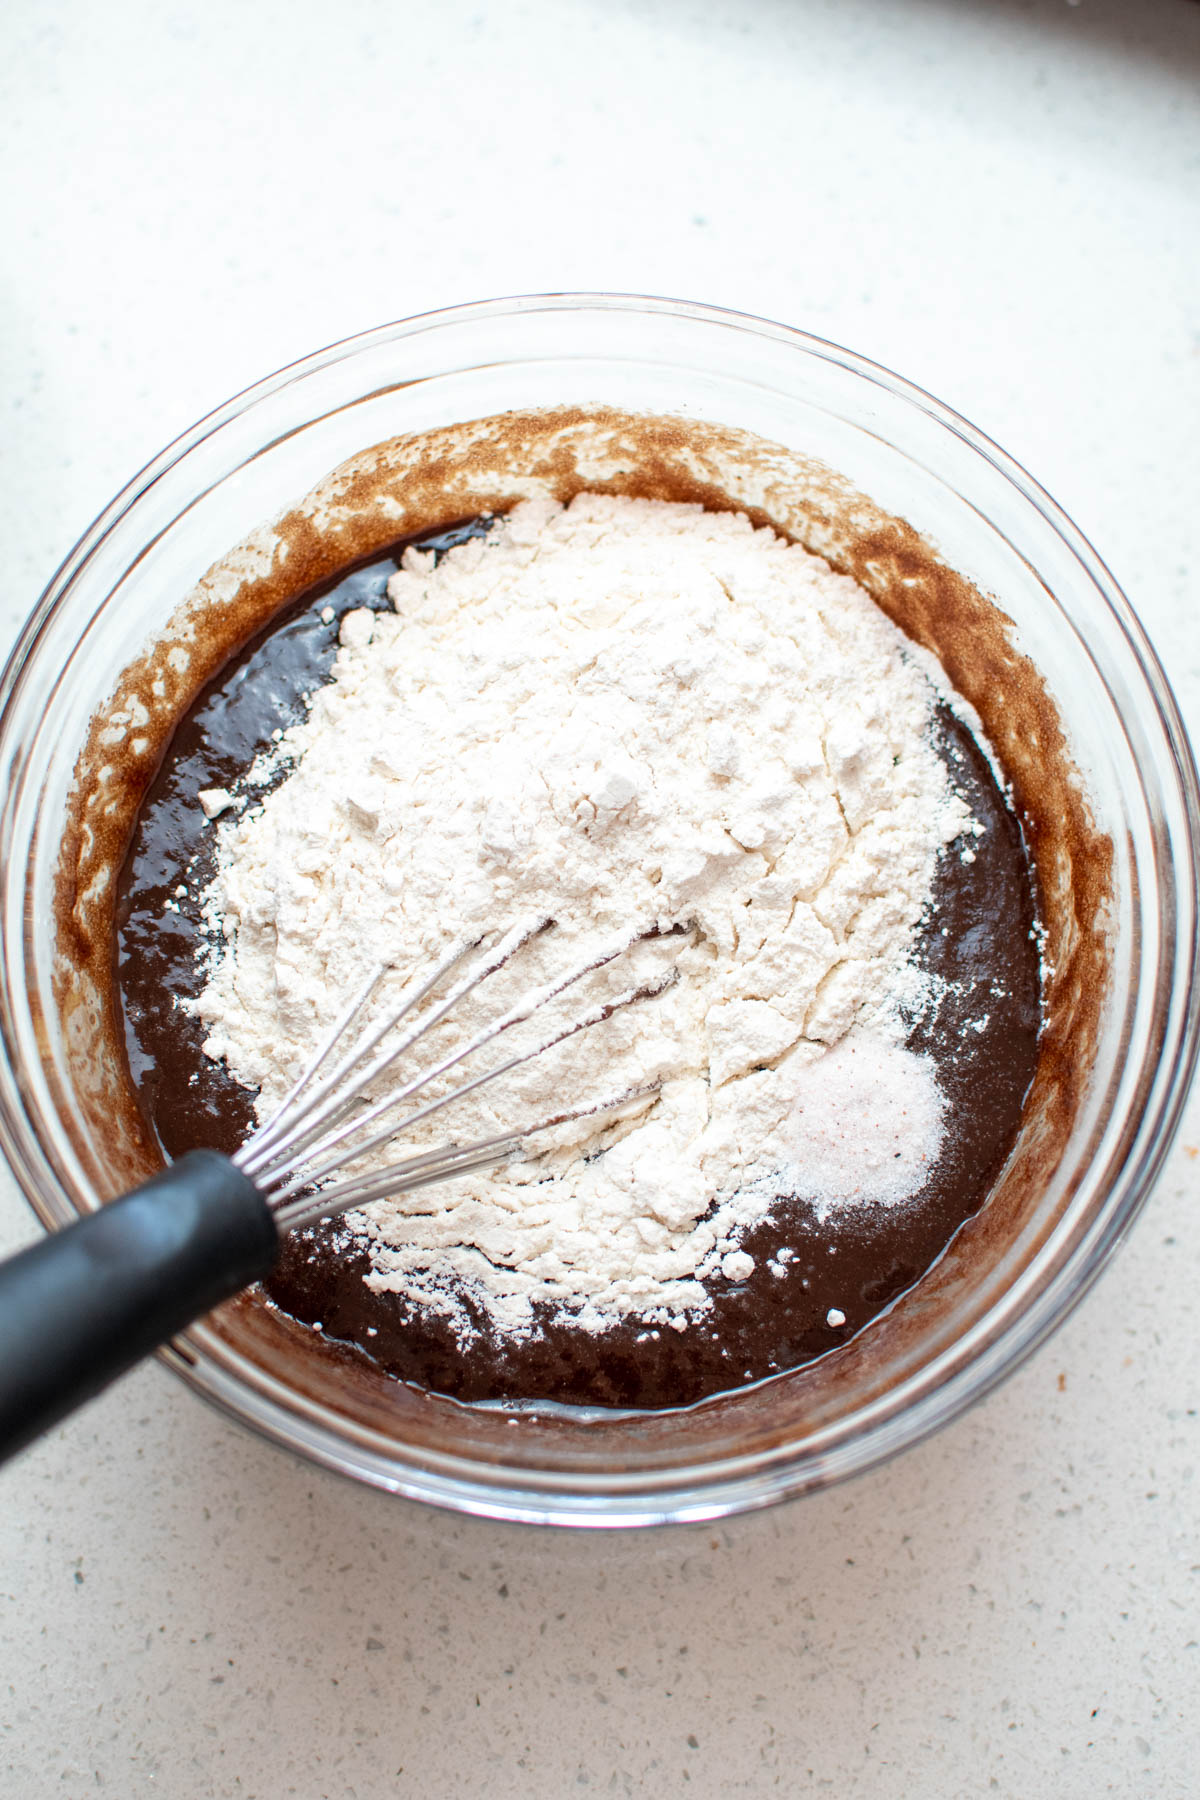 Flour and whisk in glass bowl of chocolate mixture on quartz countertop.